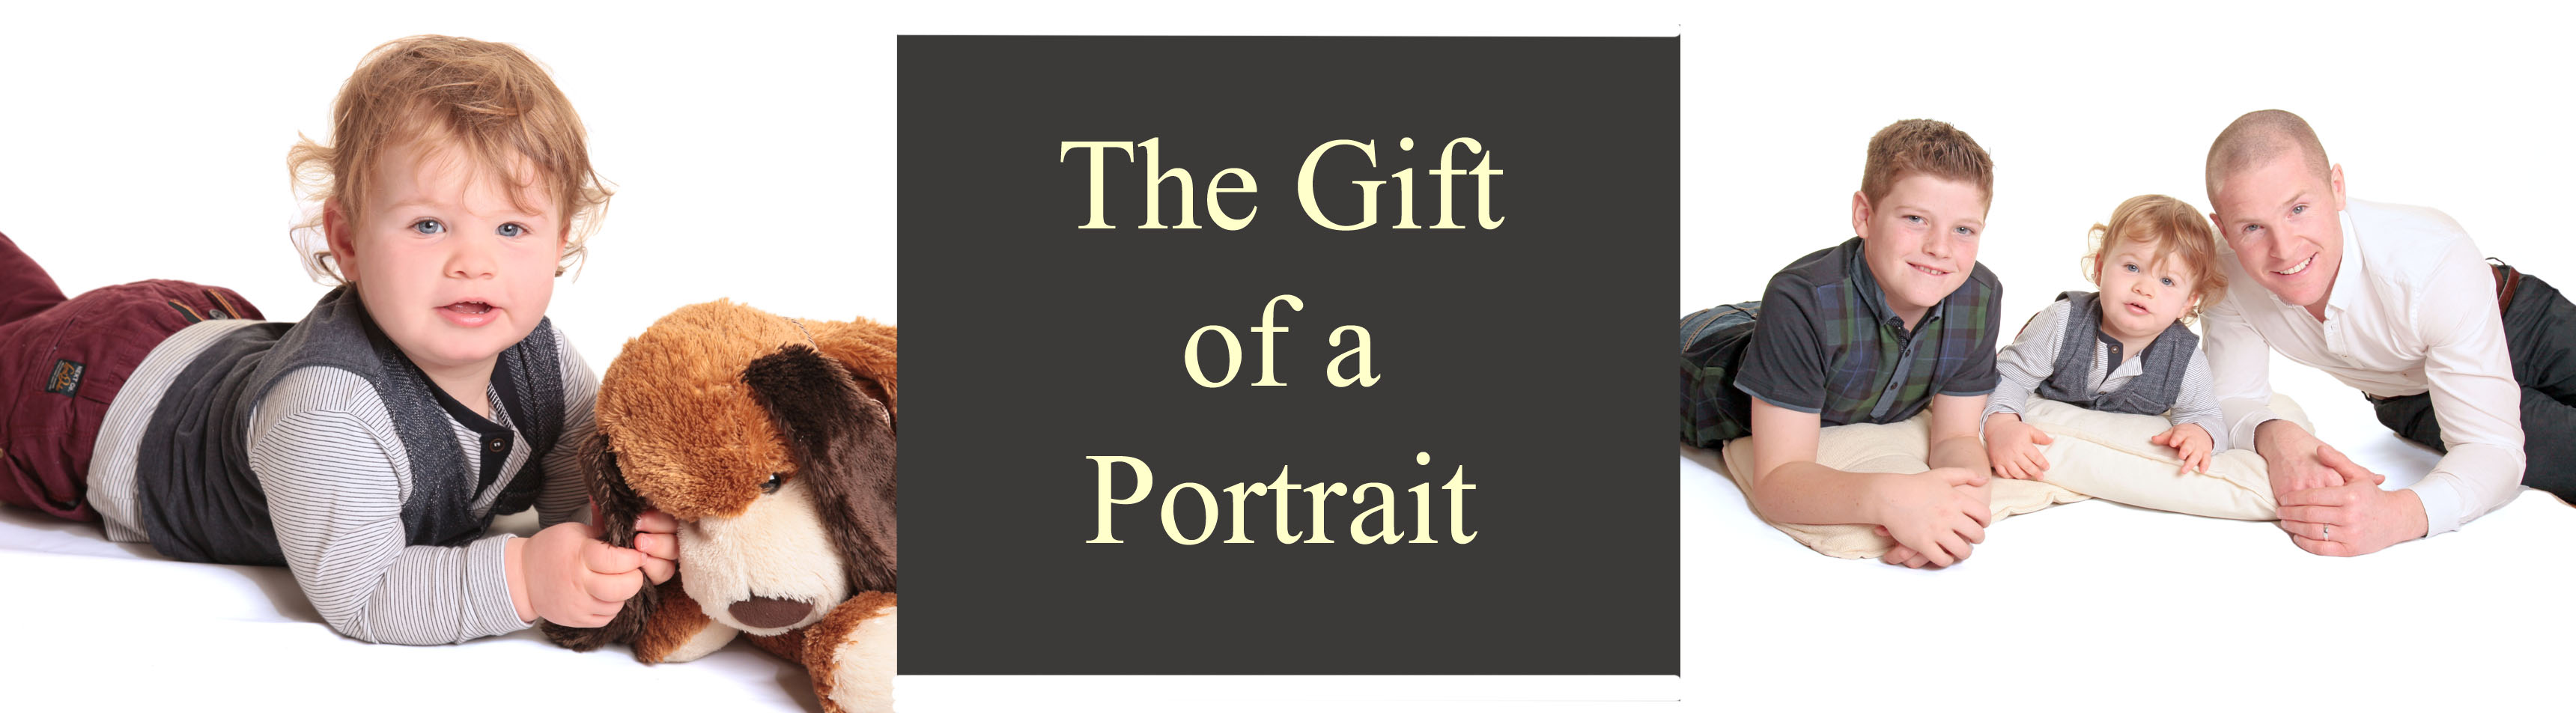 The gift of a portrait